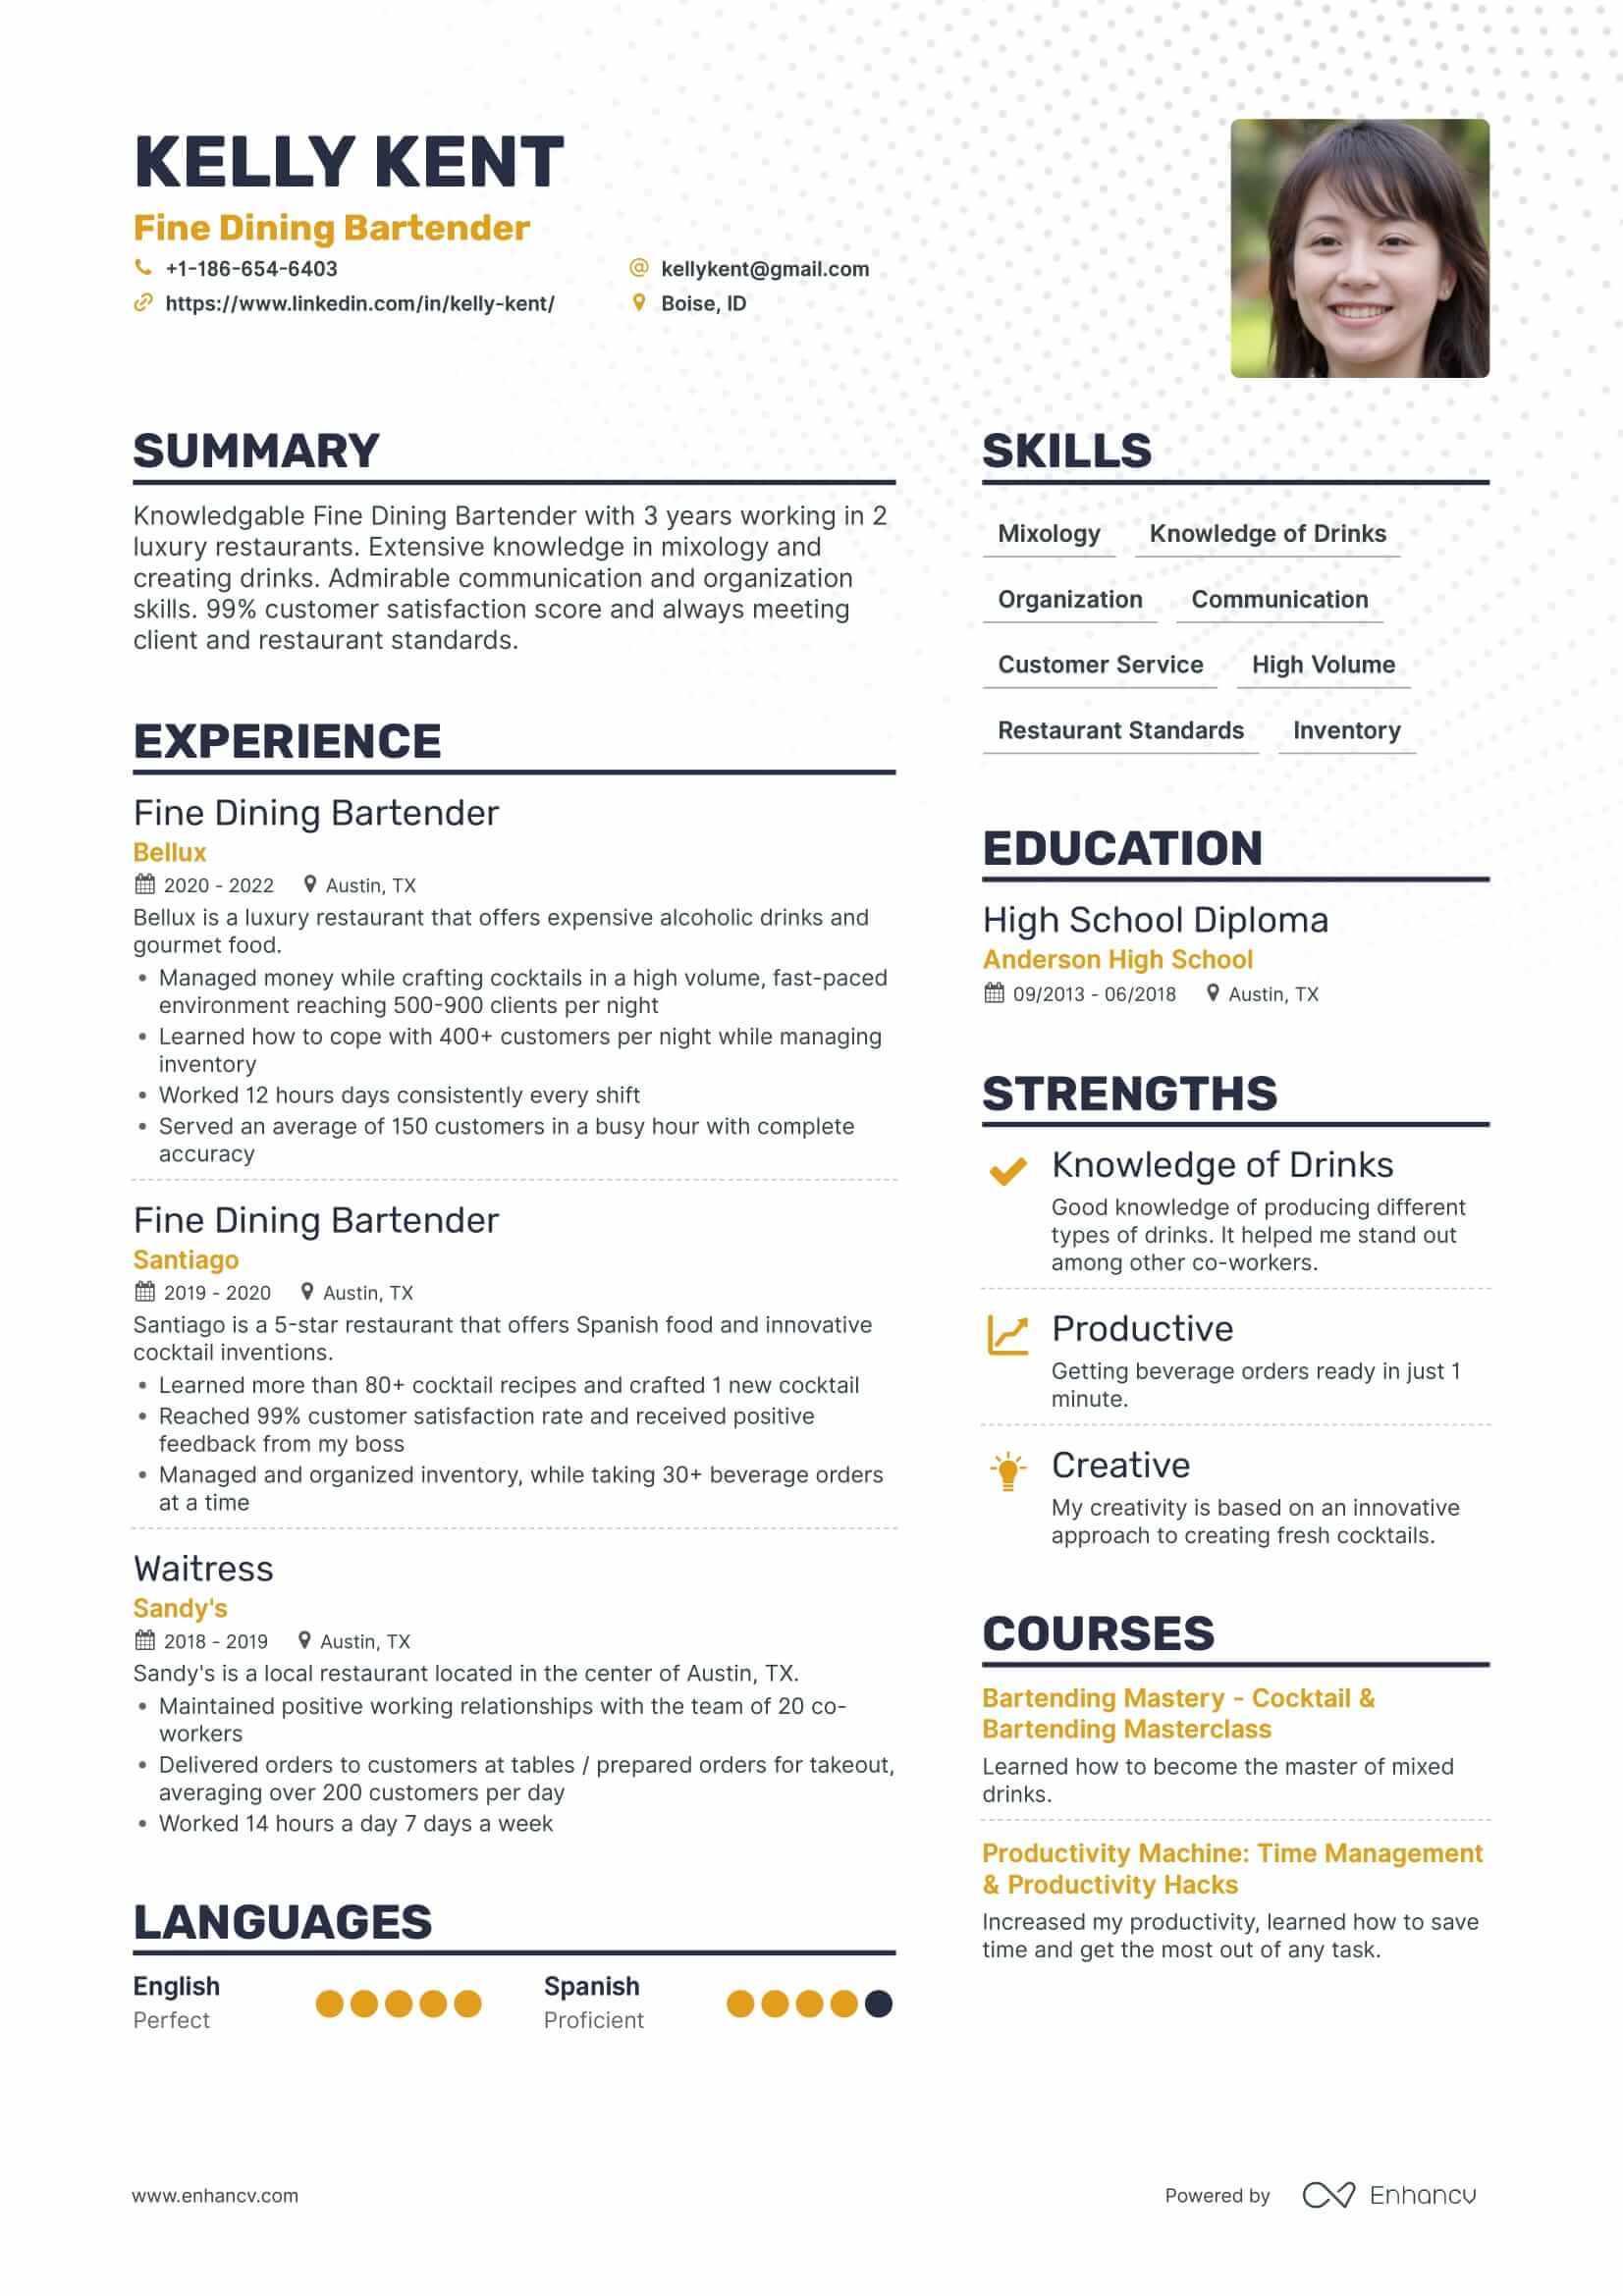 Bartender Resume Sample that is Looking to Change Careers the Ultimate 2022 Guide for Writing A Persuasive Bartender Resume …